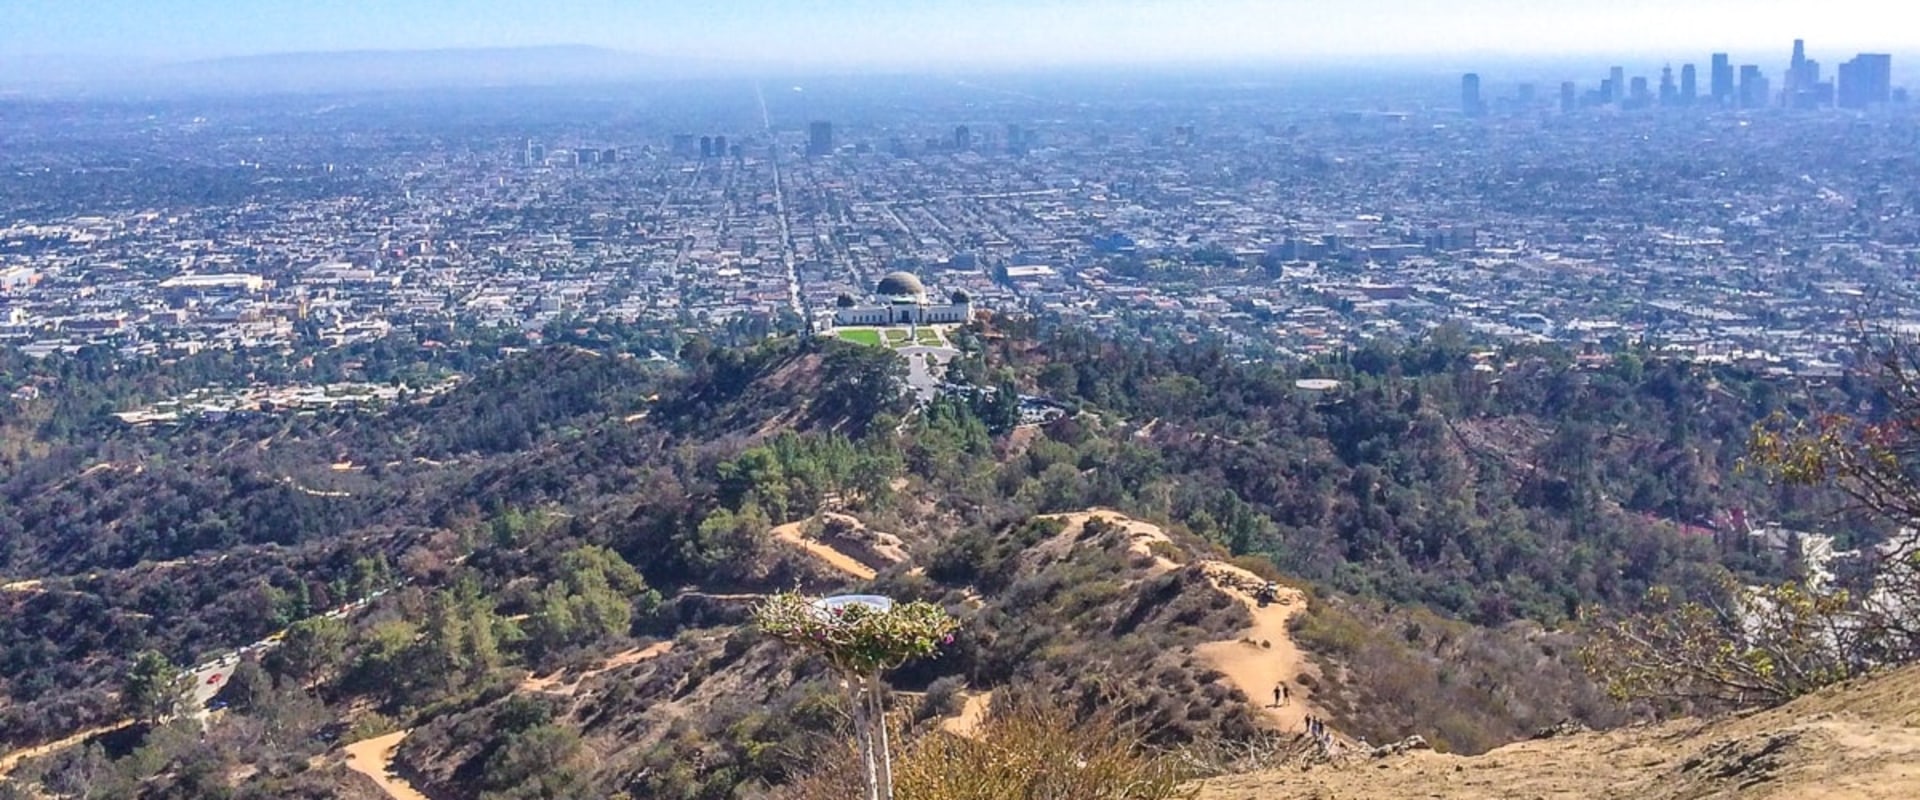 Why los angeles is the best city?